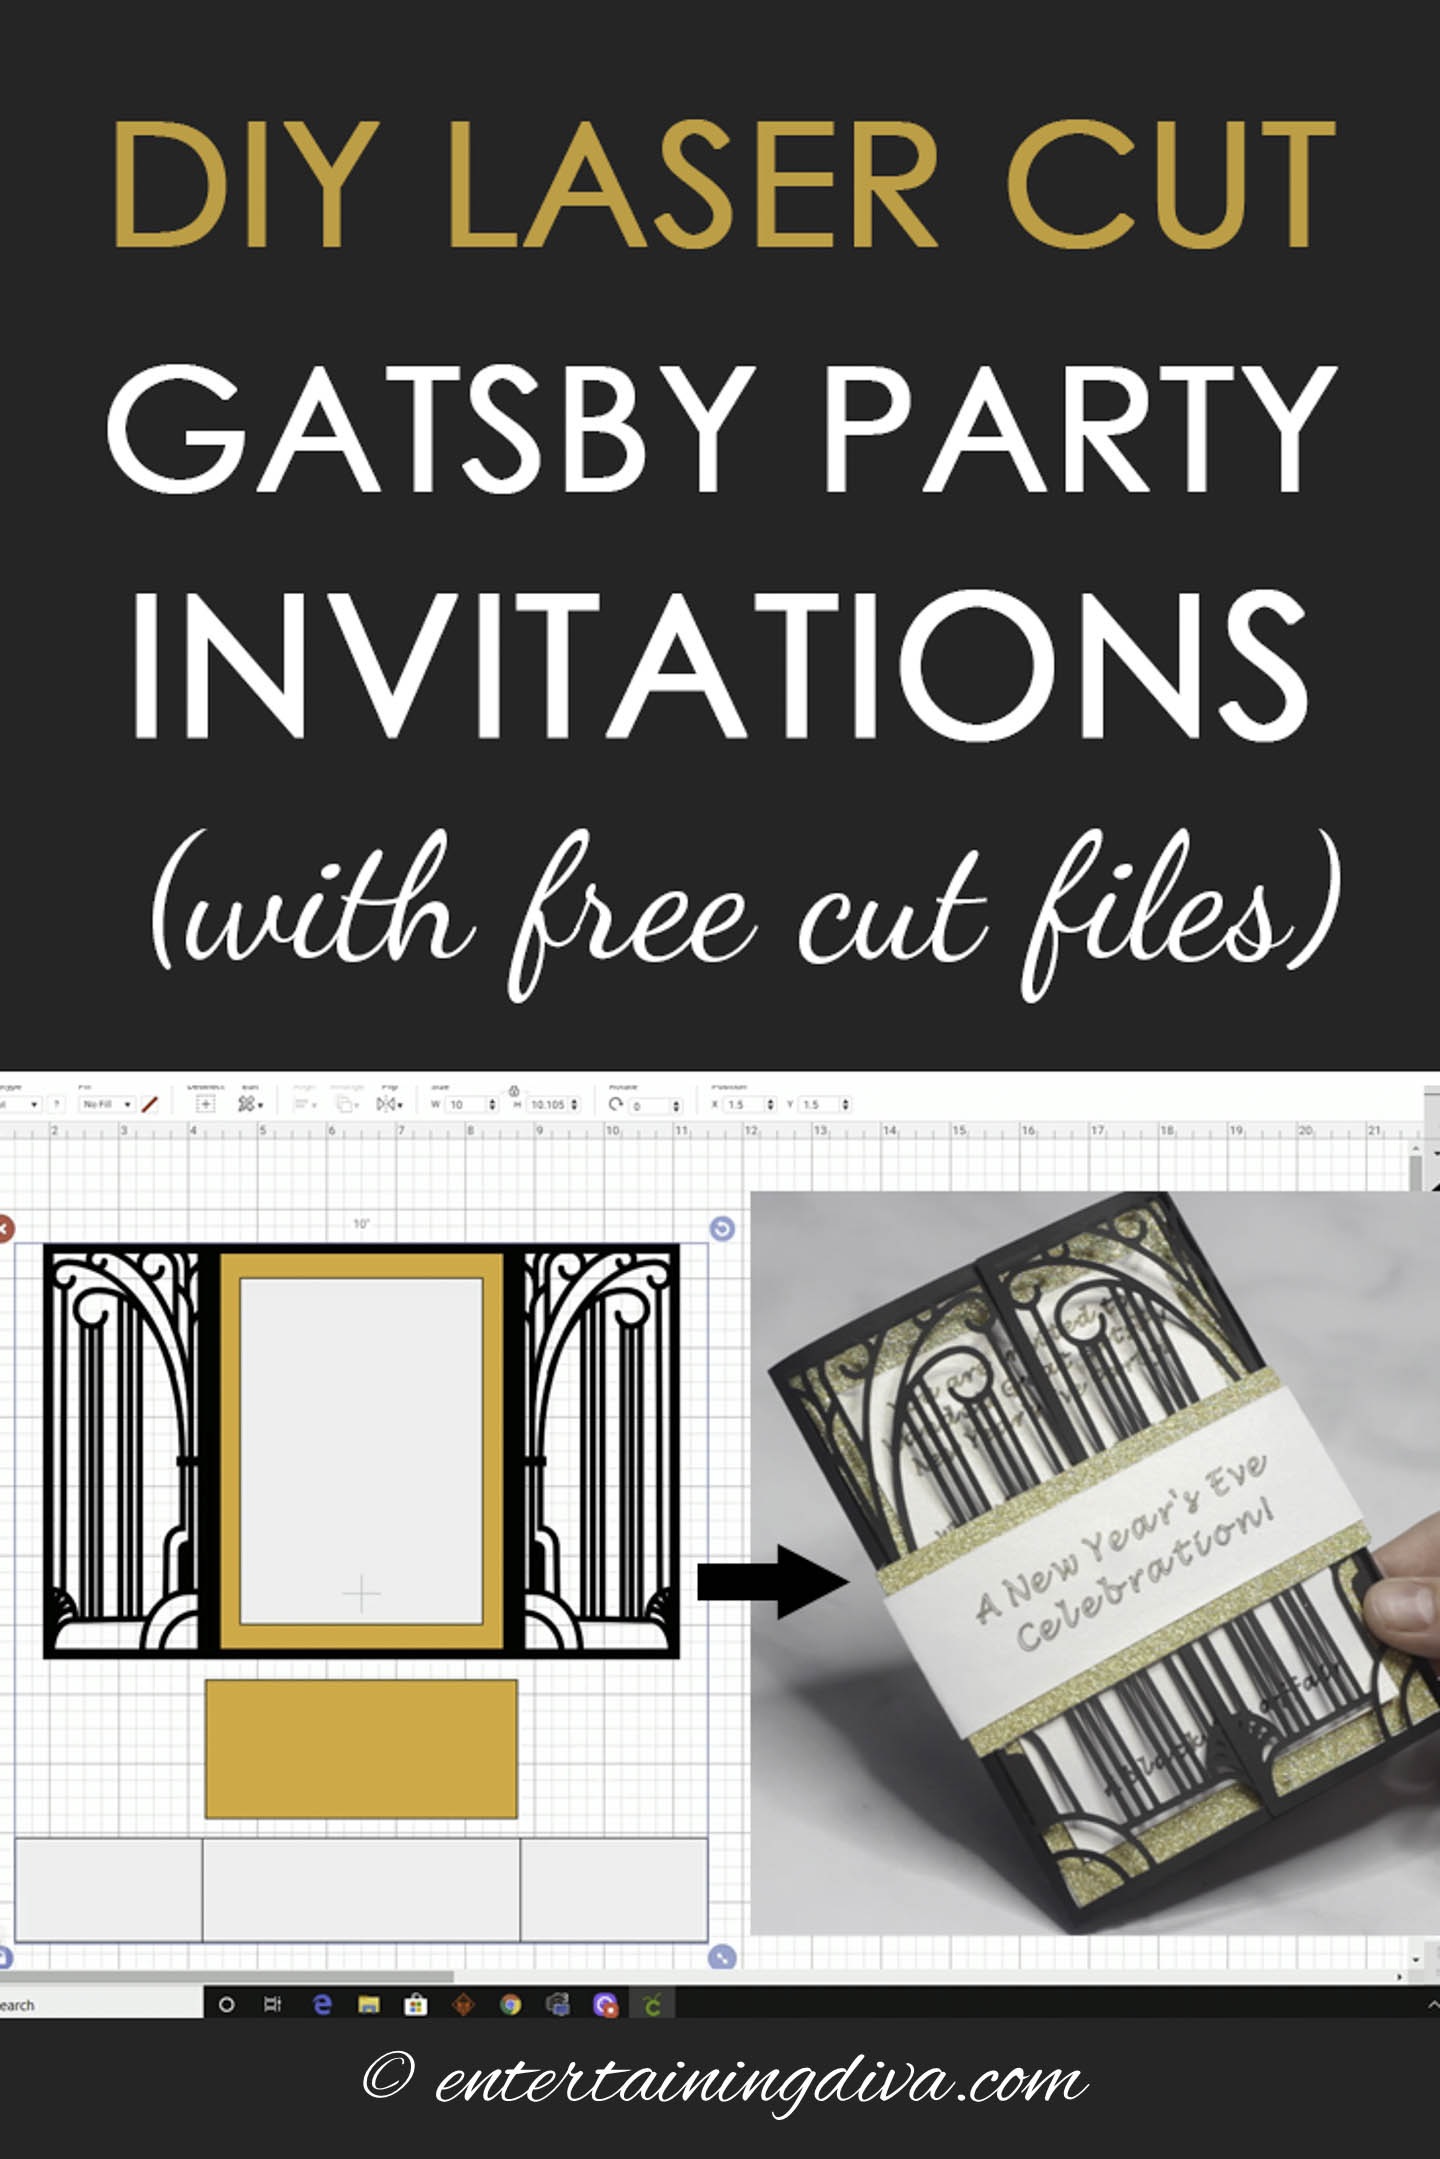 DIY laser cut Gatsby party invitations with free cut files